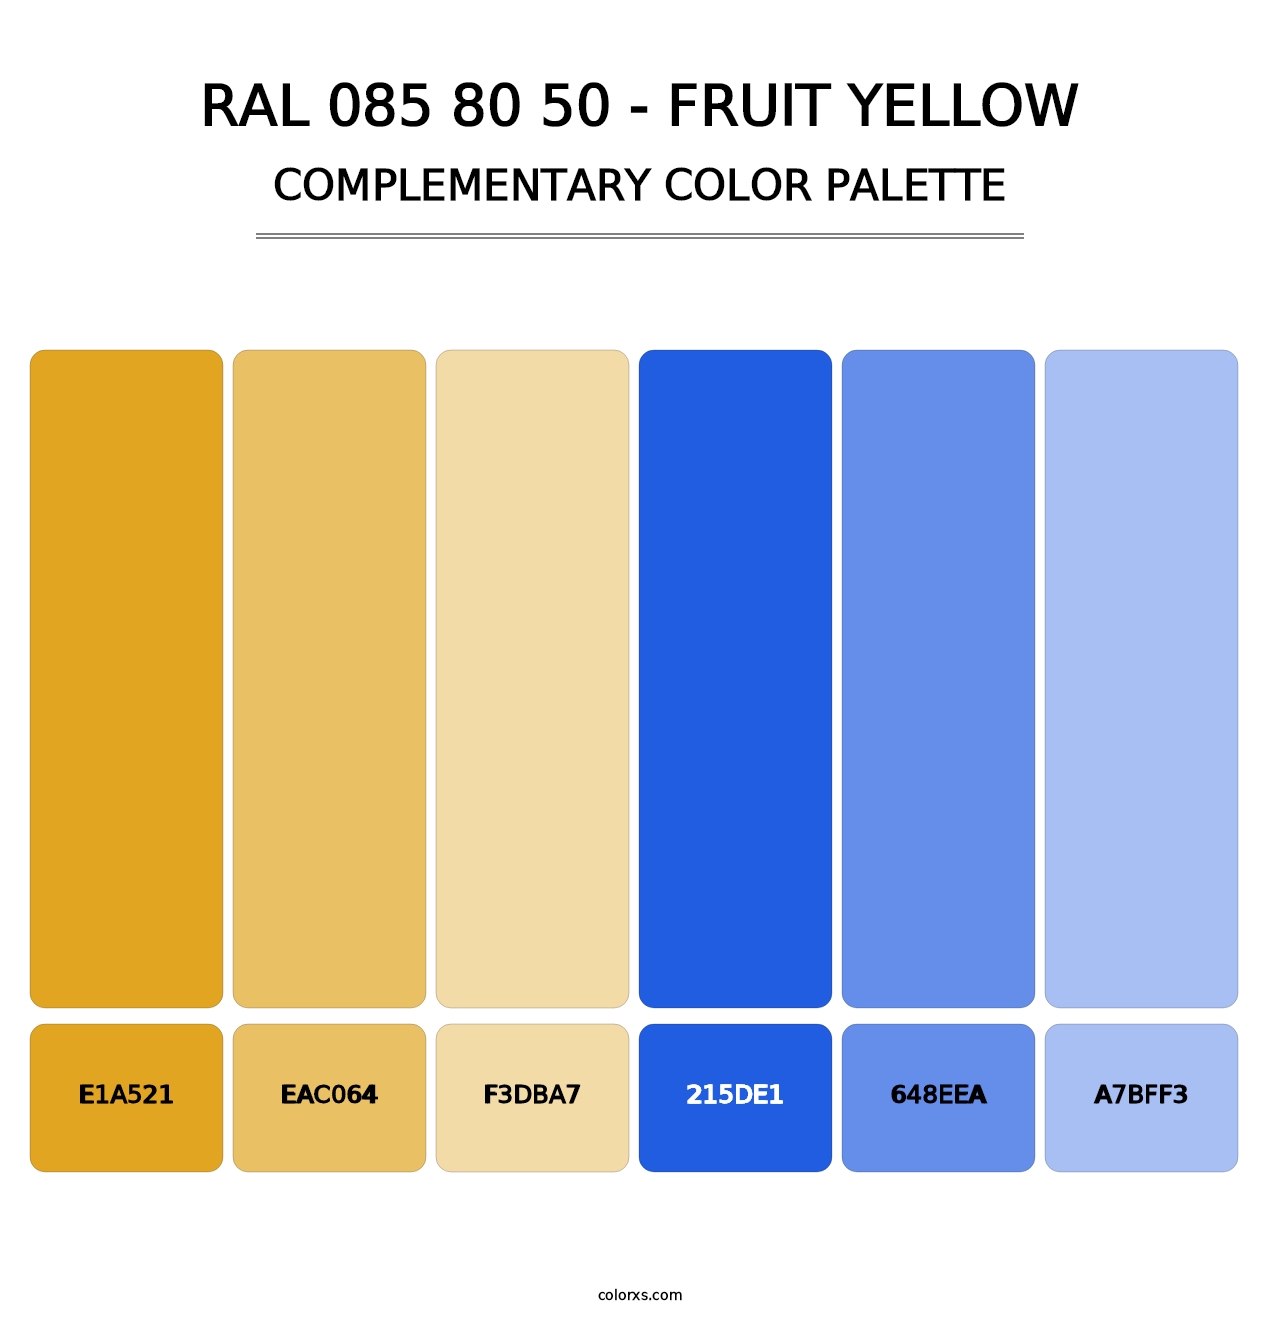 RAL 085 80 50 - Fruit Yellow - Complementary Color Palette